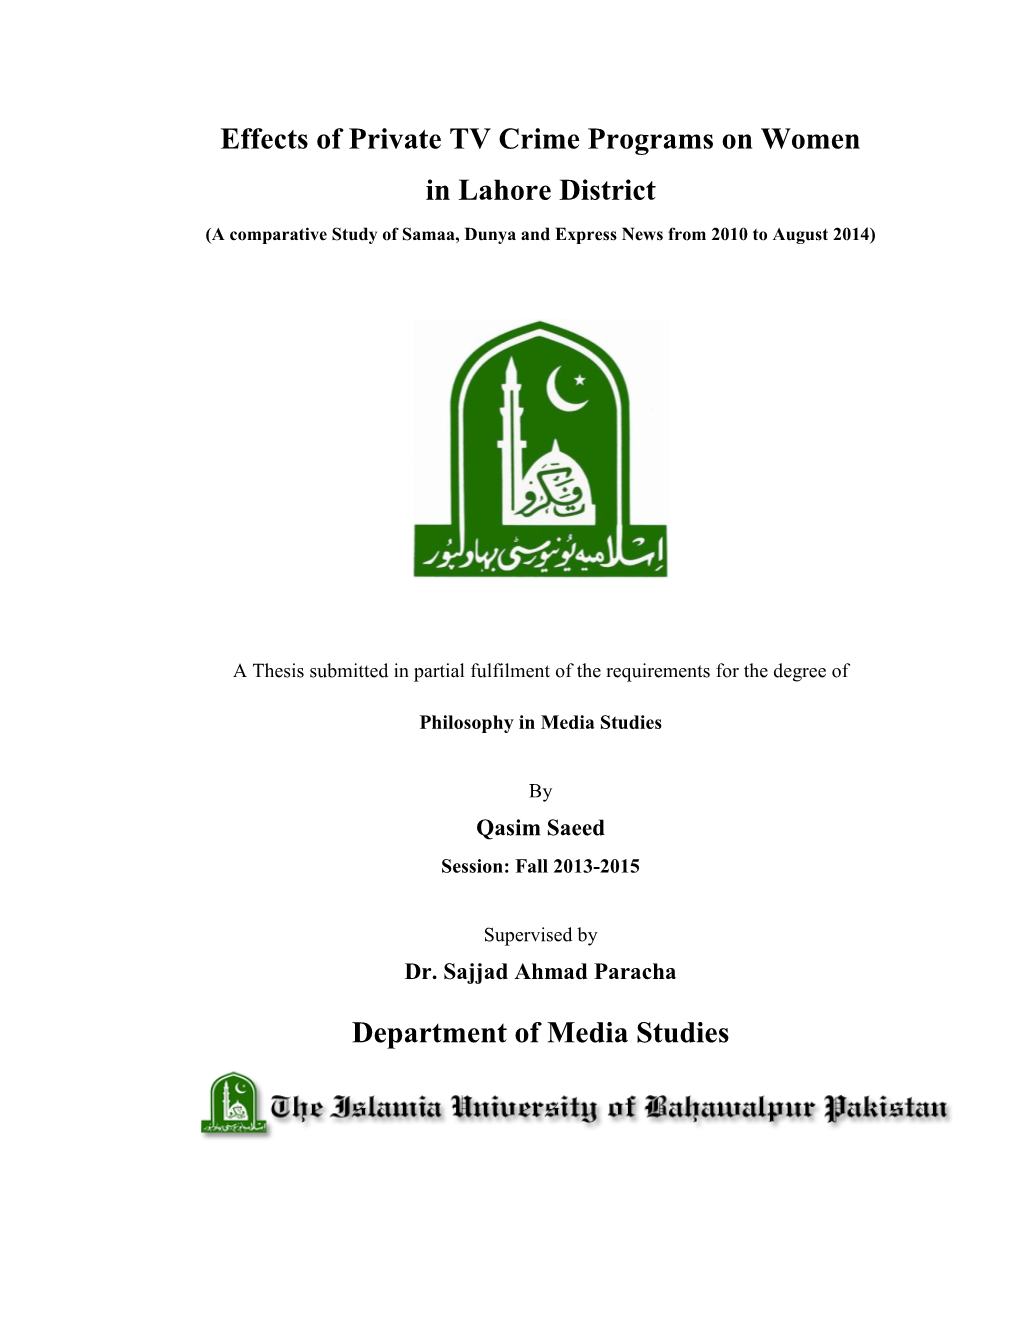 Effects of Private TV Crime Programs on Women in Lahore District Department of Media Studies